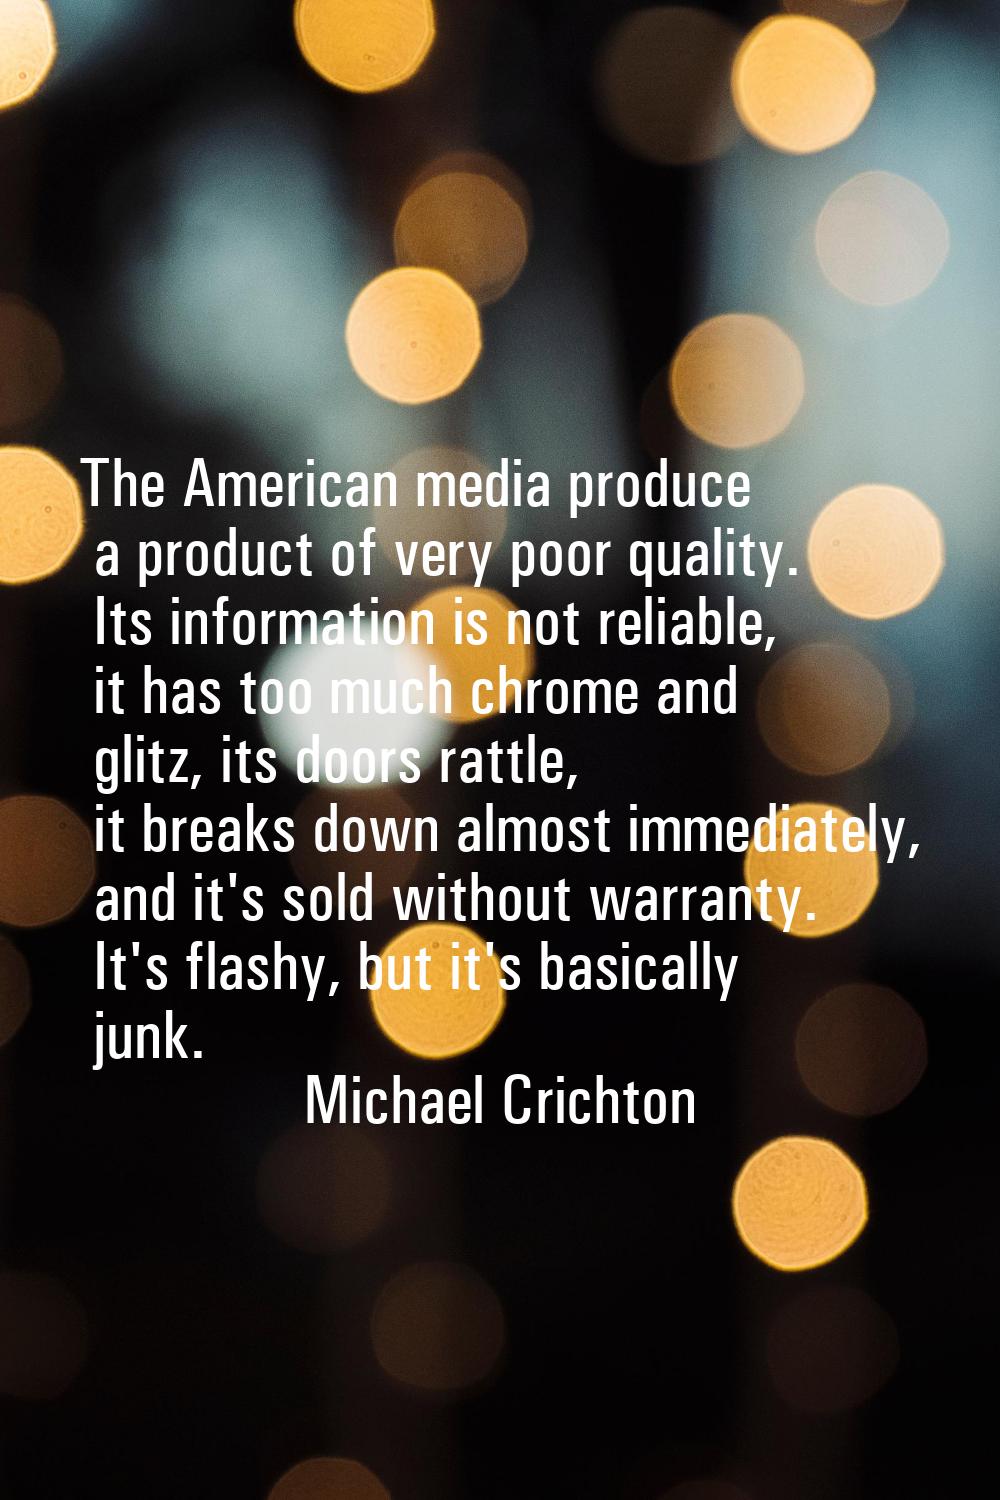 The American media produce a product of very poor quality. Its information is not reliable, it has 